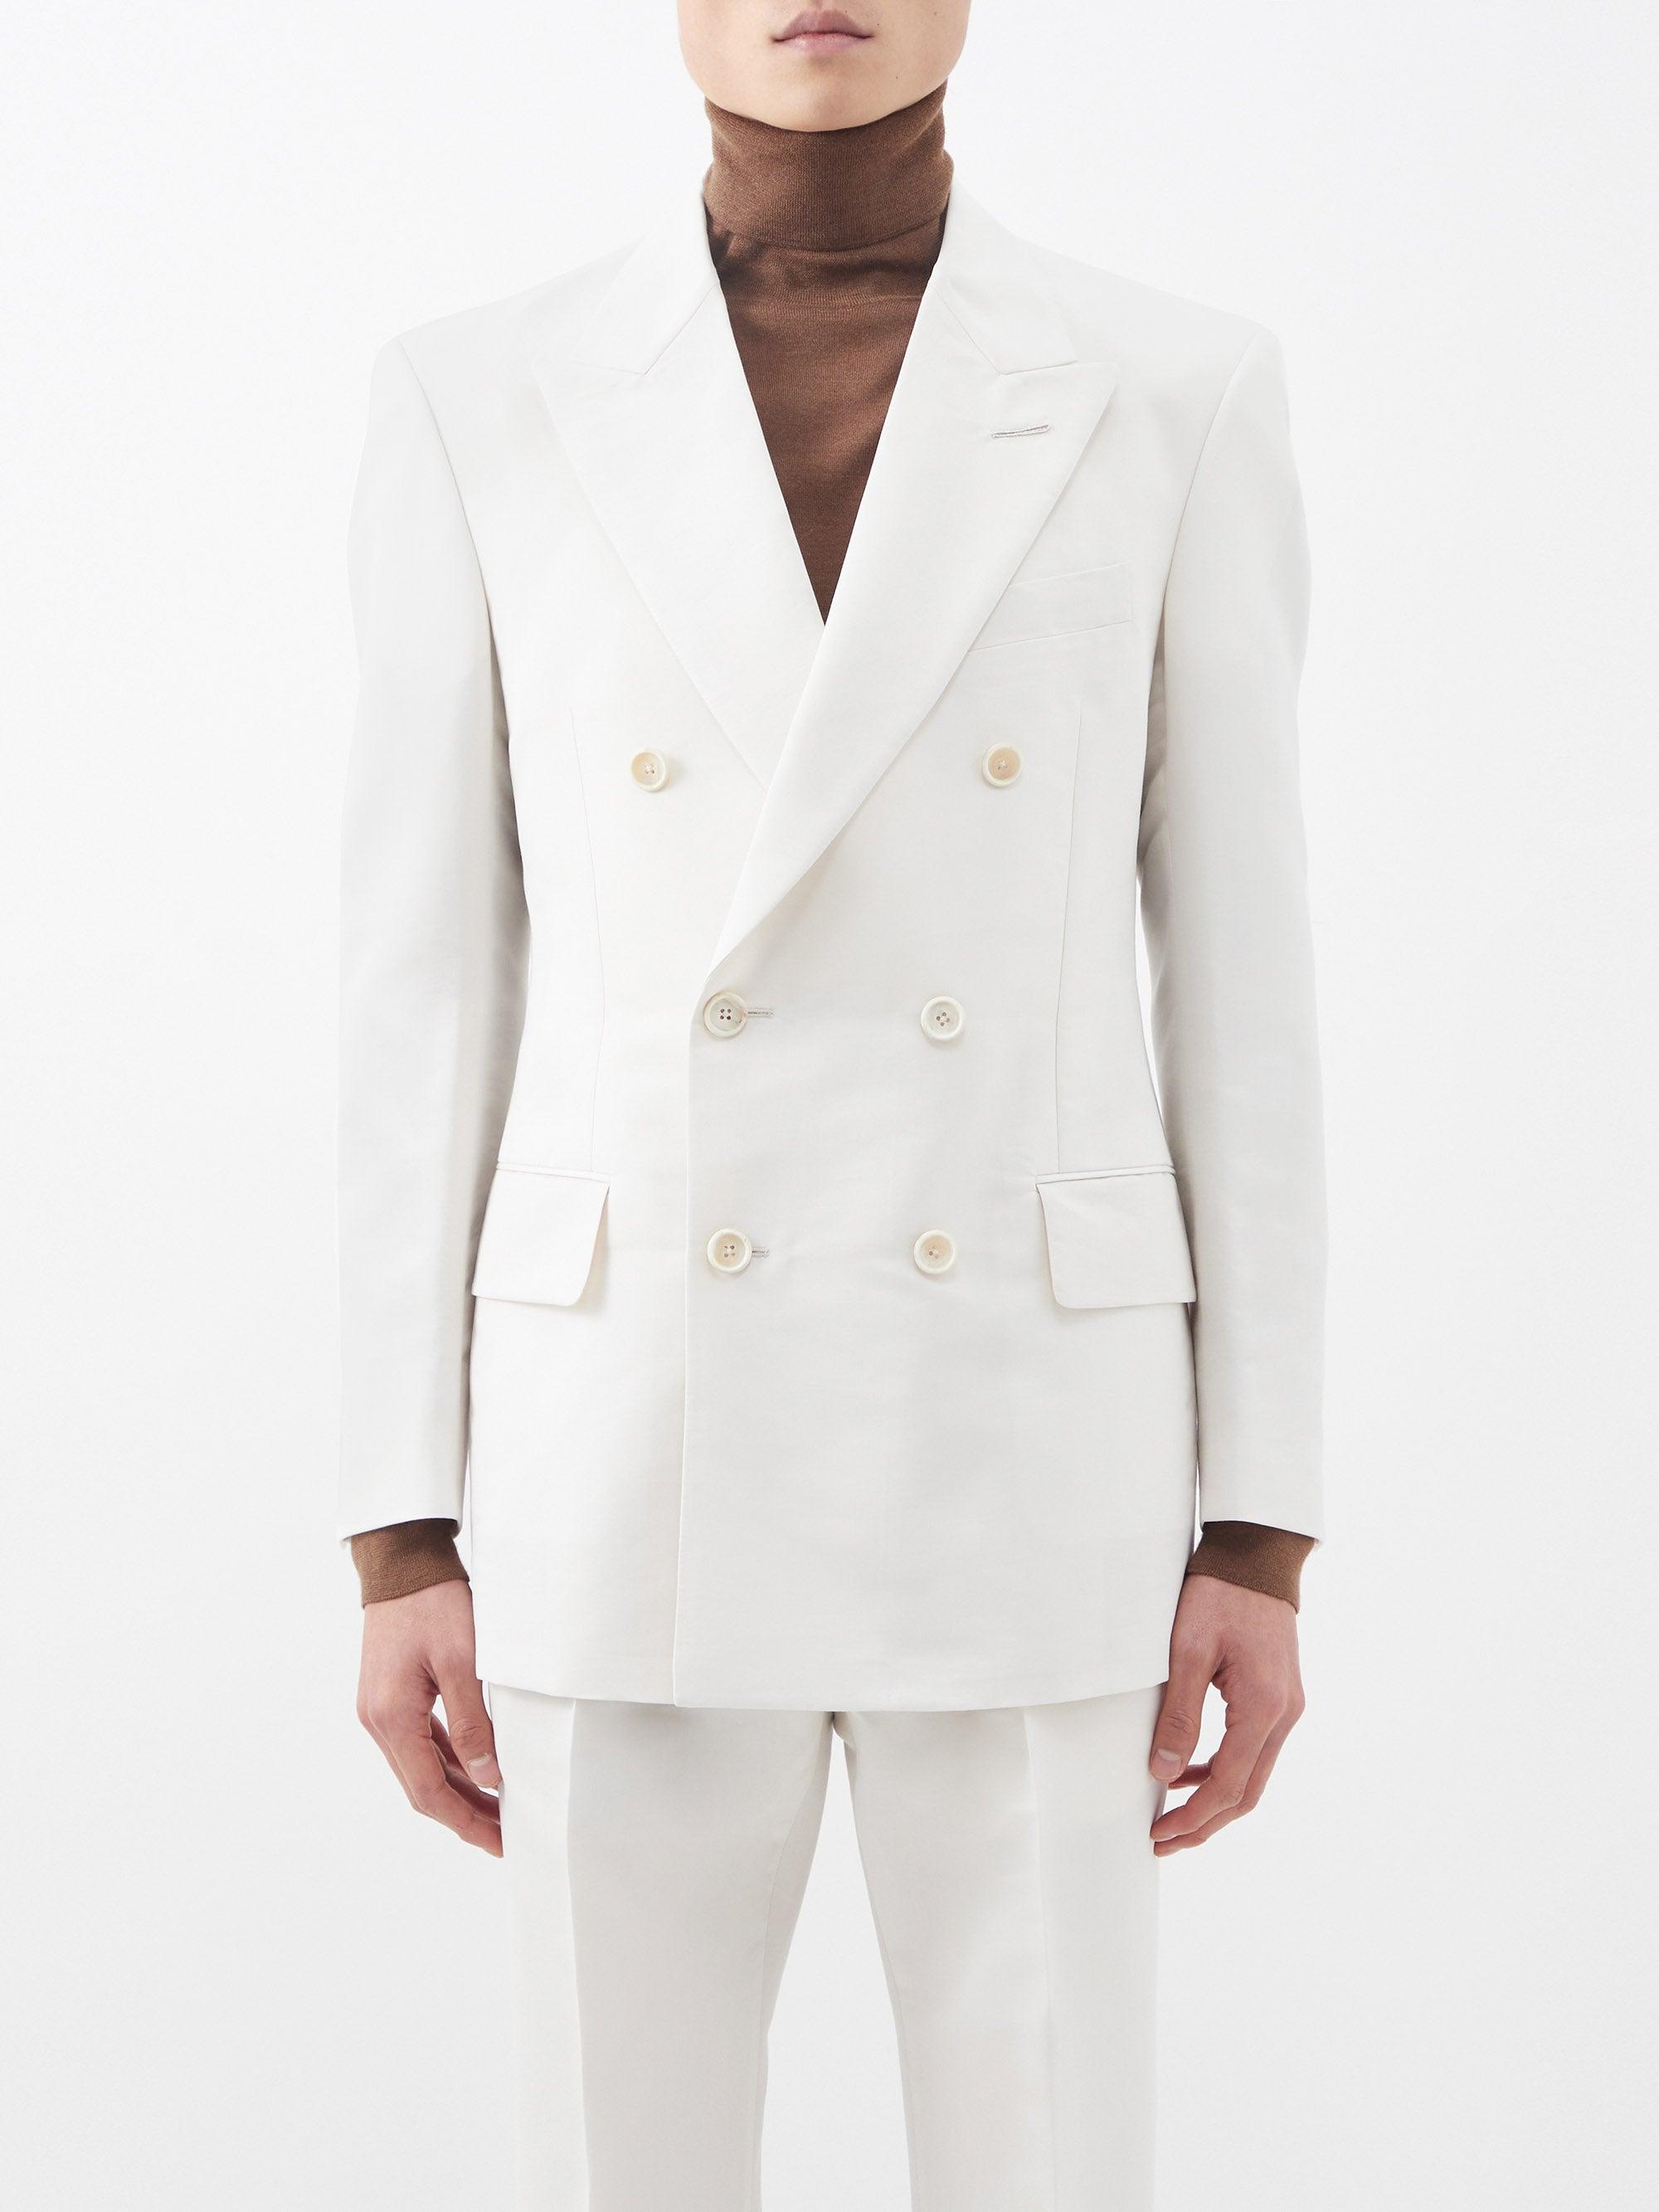 Top 45+ imagen tom ford double breasted suit - Abzlocal.mx